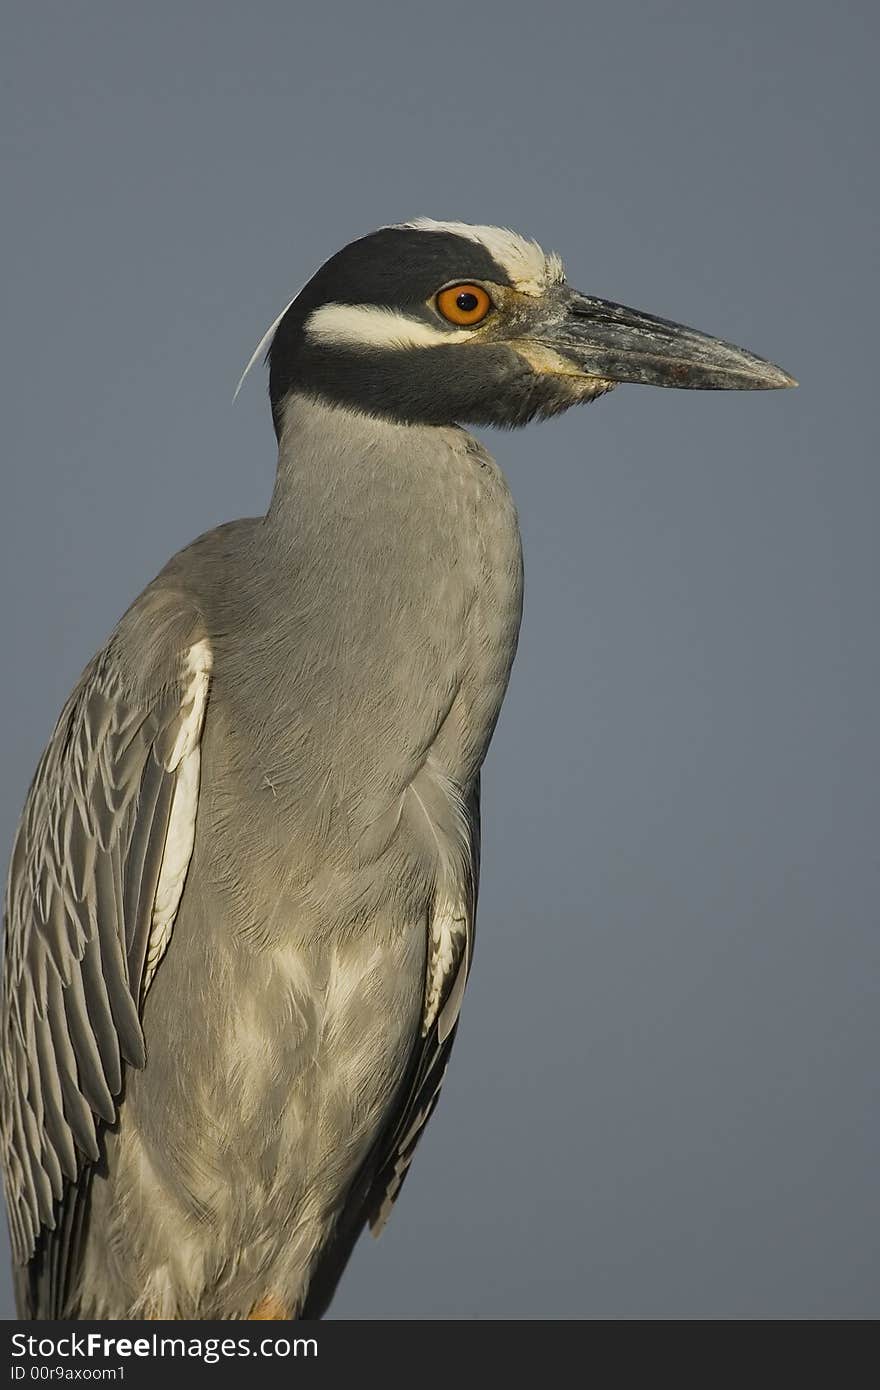 A Yellow-crowned Night Heron perched on a sign post at the local wildlife refuge